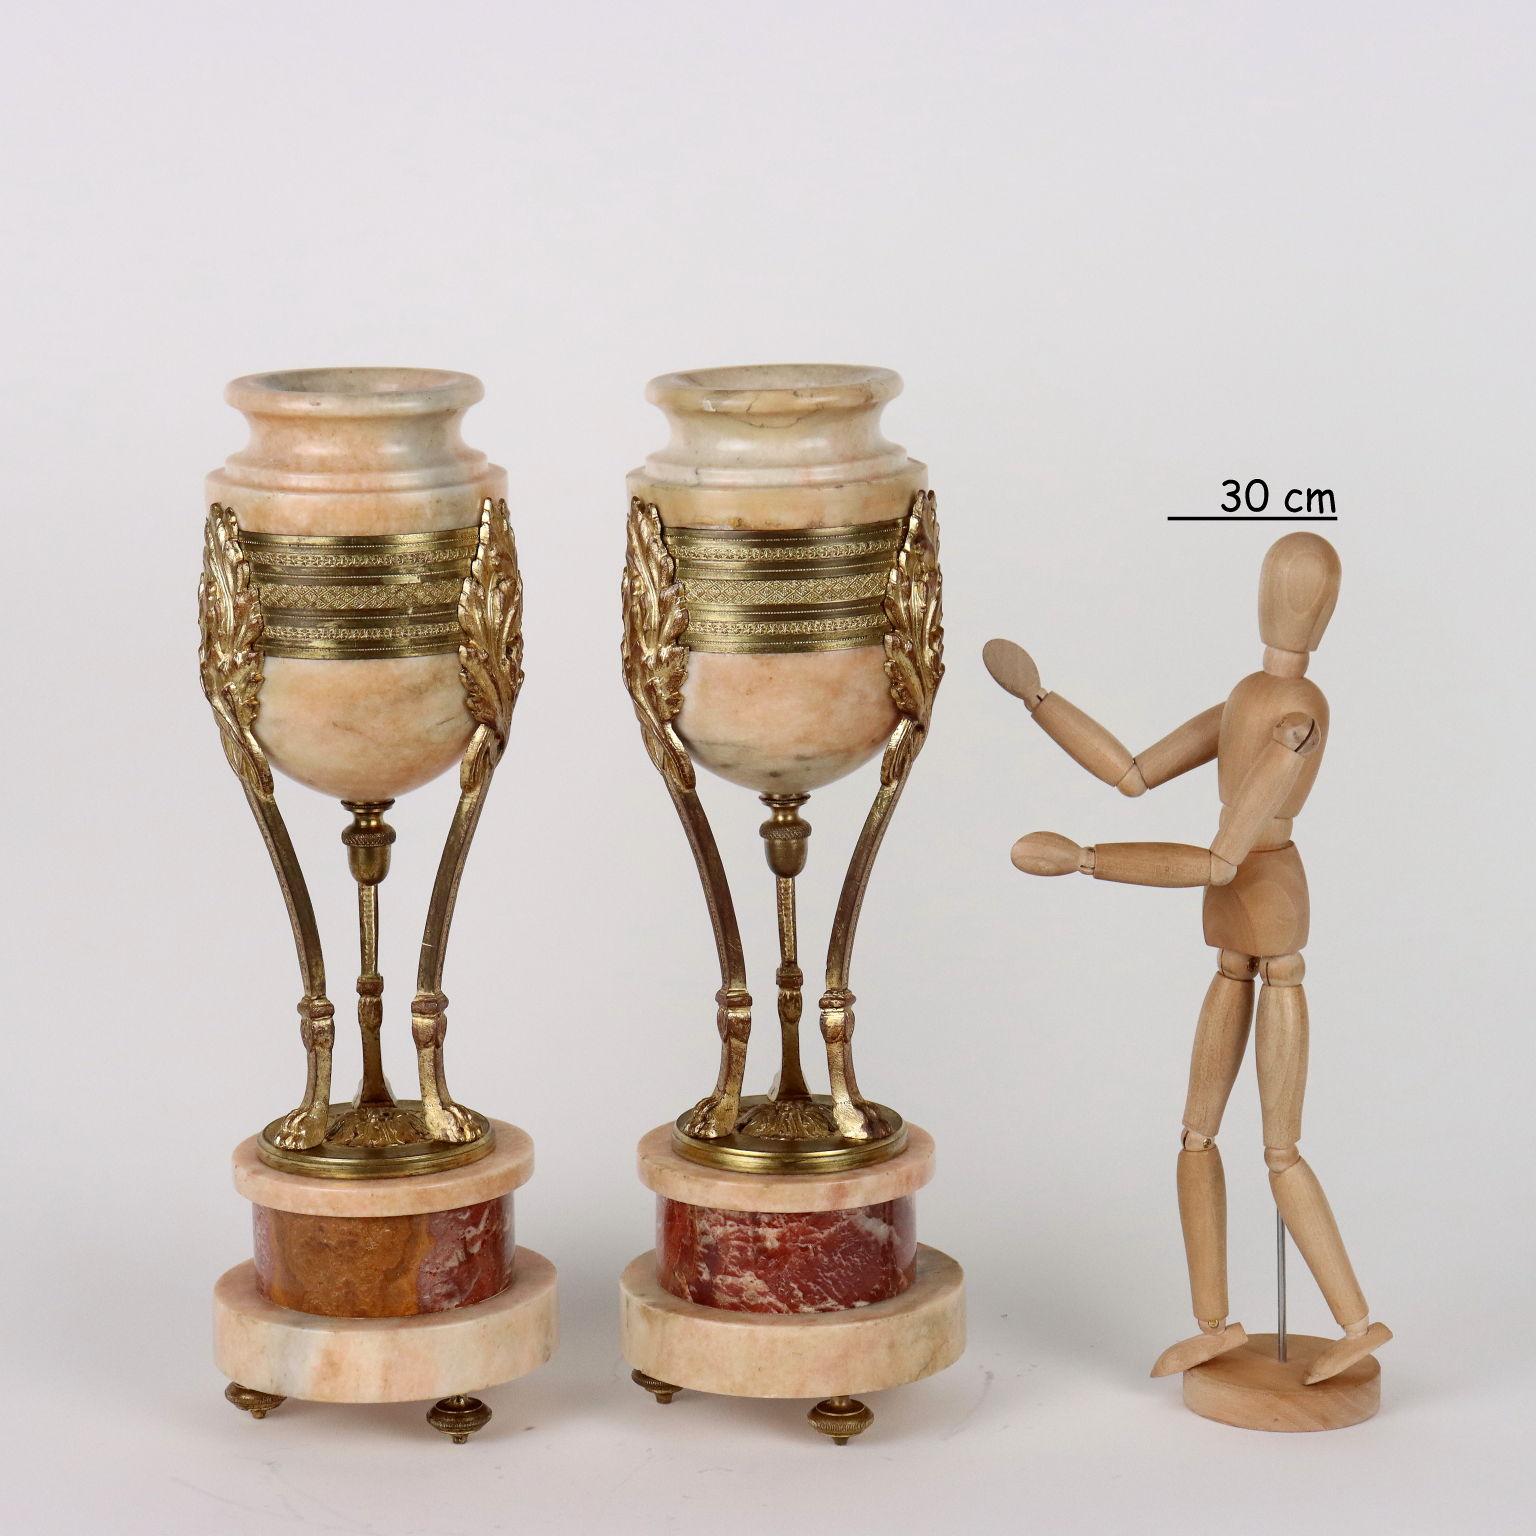 Pair of vases in pink marble and gilt bronze. A tripod vase with feral paw feet rests on a circular marble base and the top marble cup is held by three flames with a gilded and chiseled bronze band.